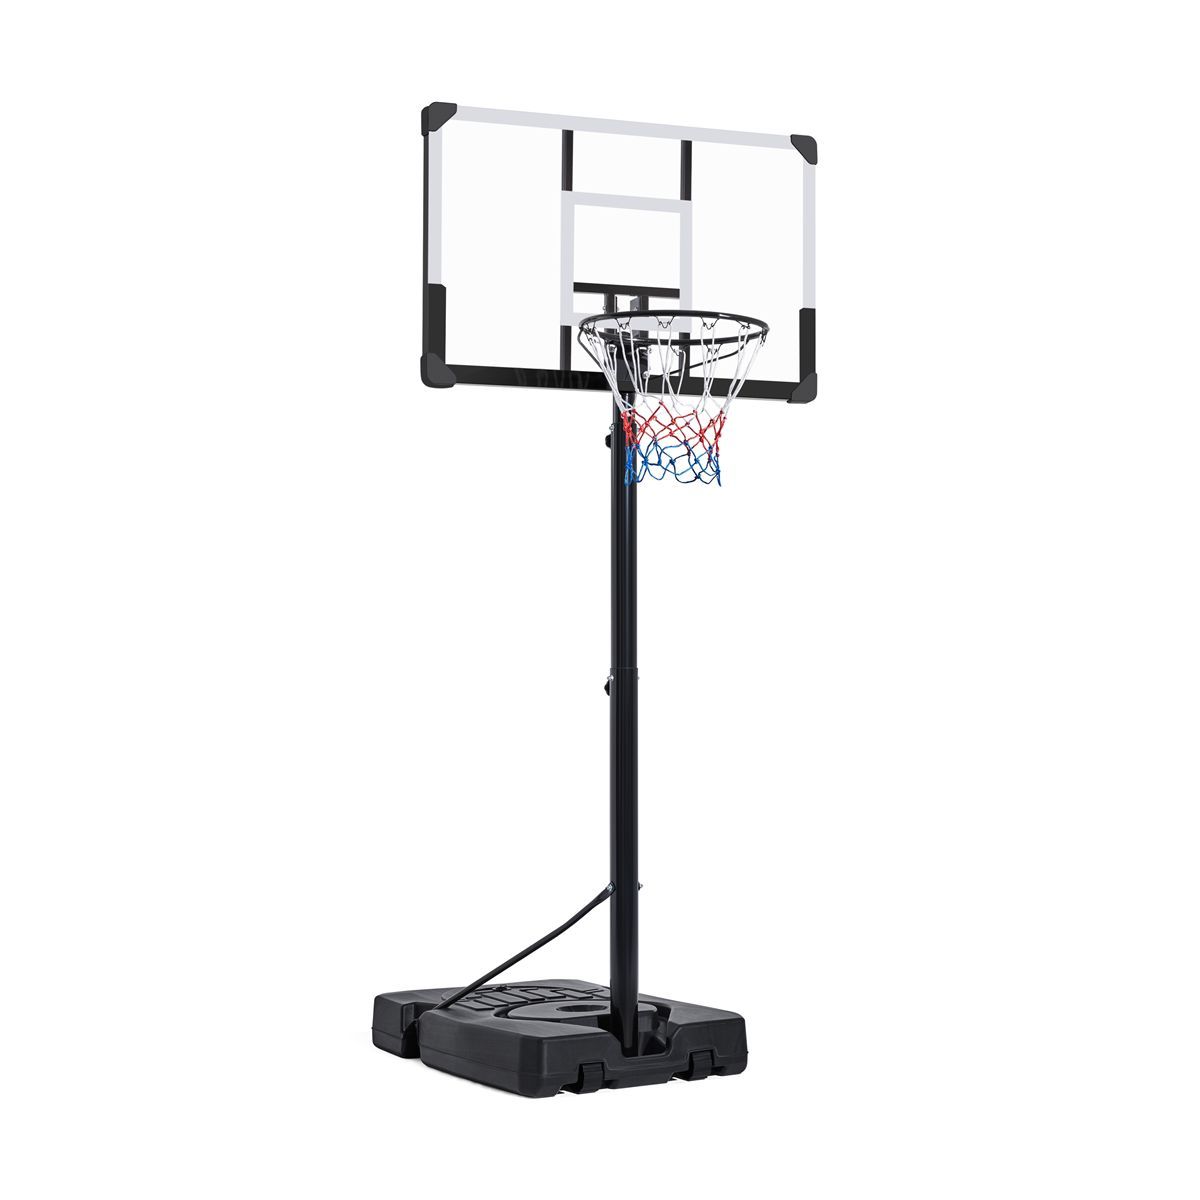 Yaheetech Portable Basketball Hoop System for Teens/Adults Black | Target